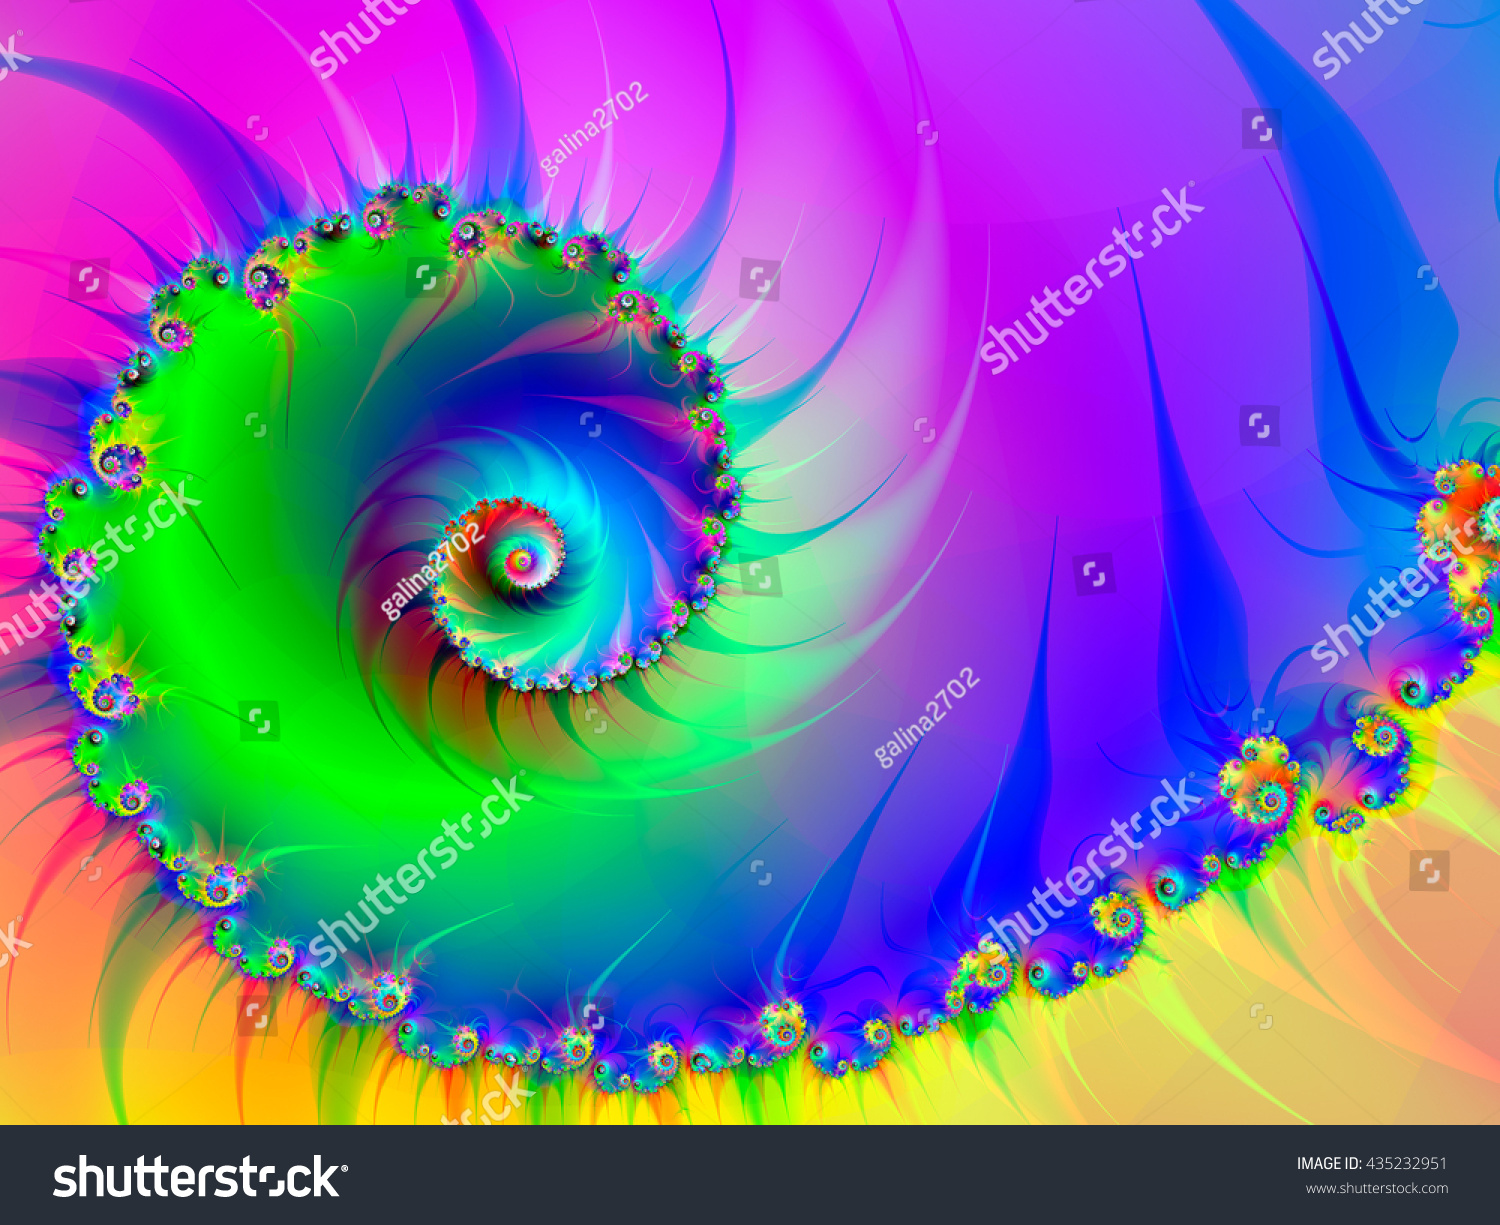 Abstract fractal background computer-generated image #435232951